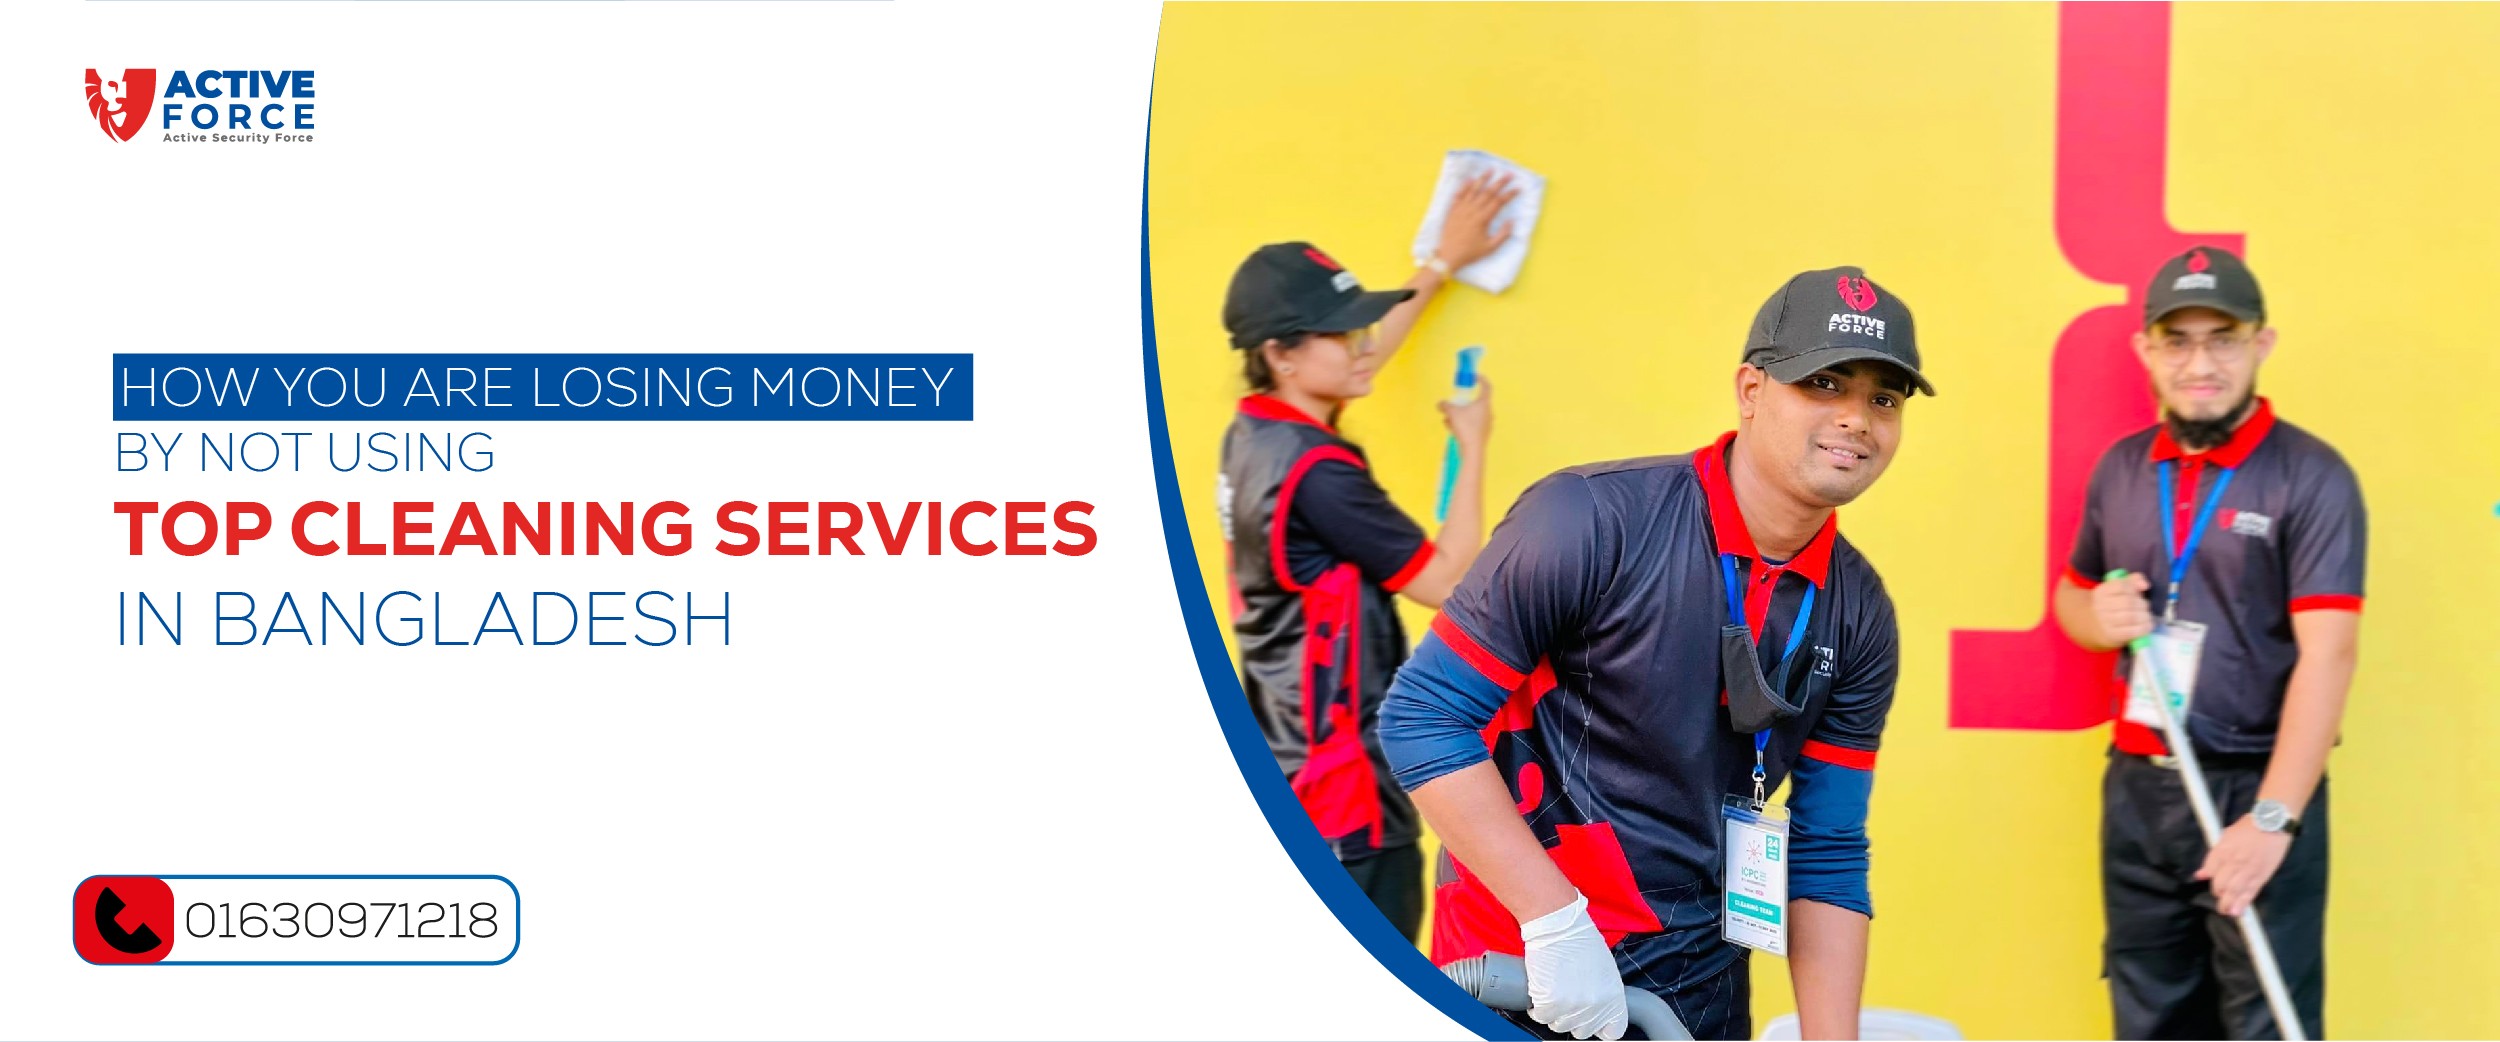 Warning: How You are Losing Money by Not Using Top Cleaning Services in Bangladesh